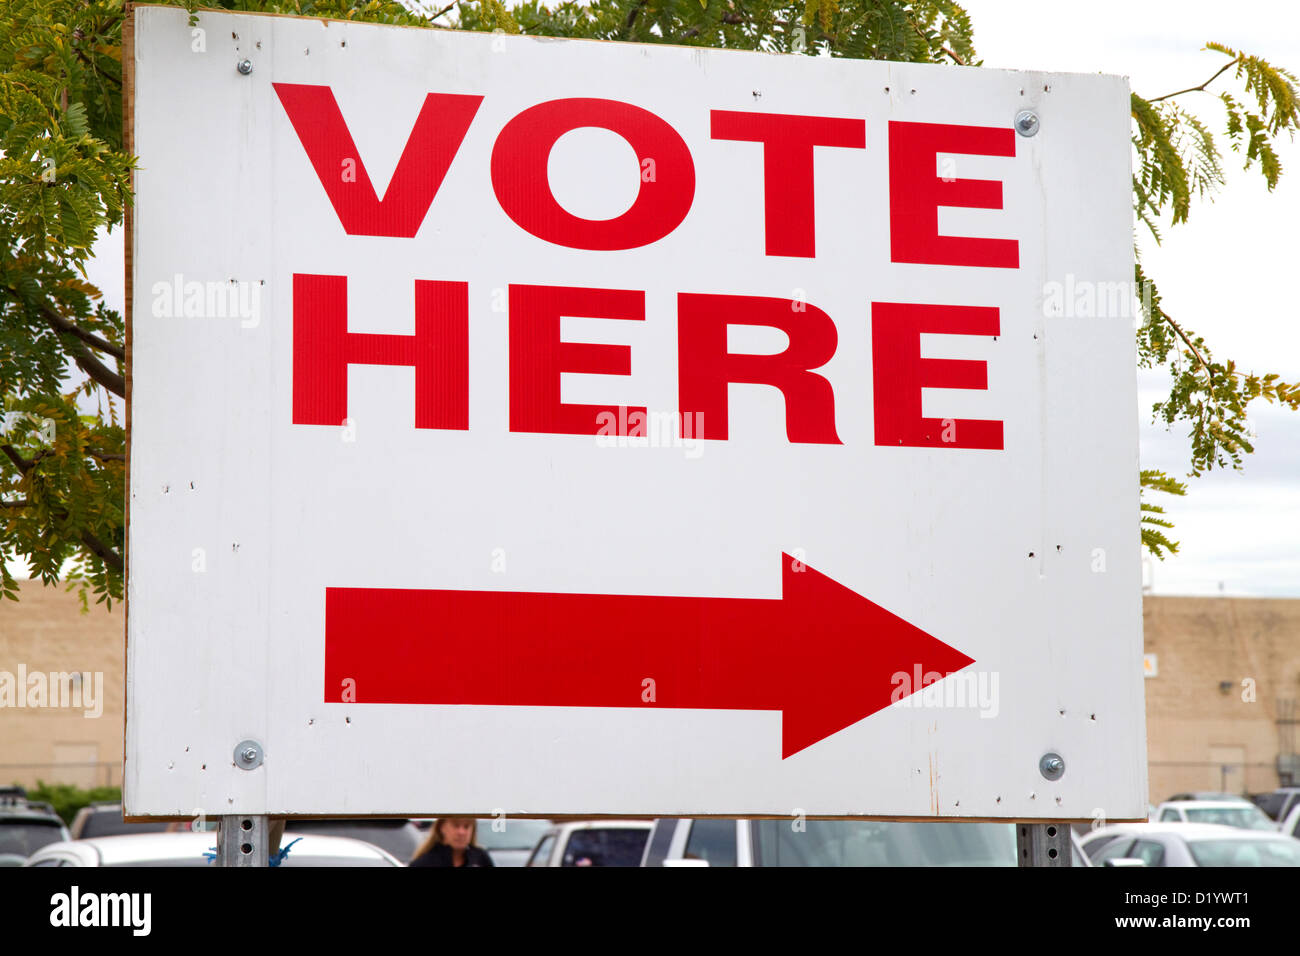 Vote here sign in Boise, Idaho, USA. Stock Photo